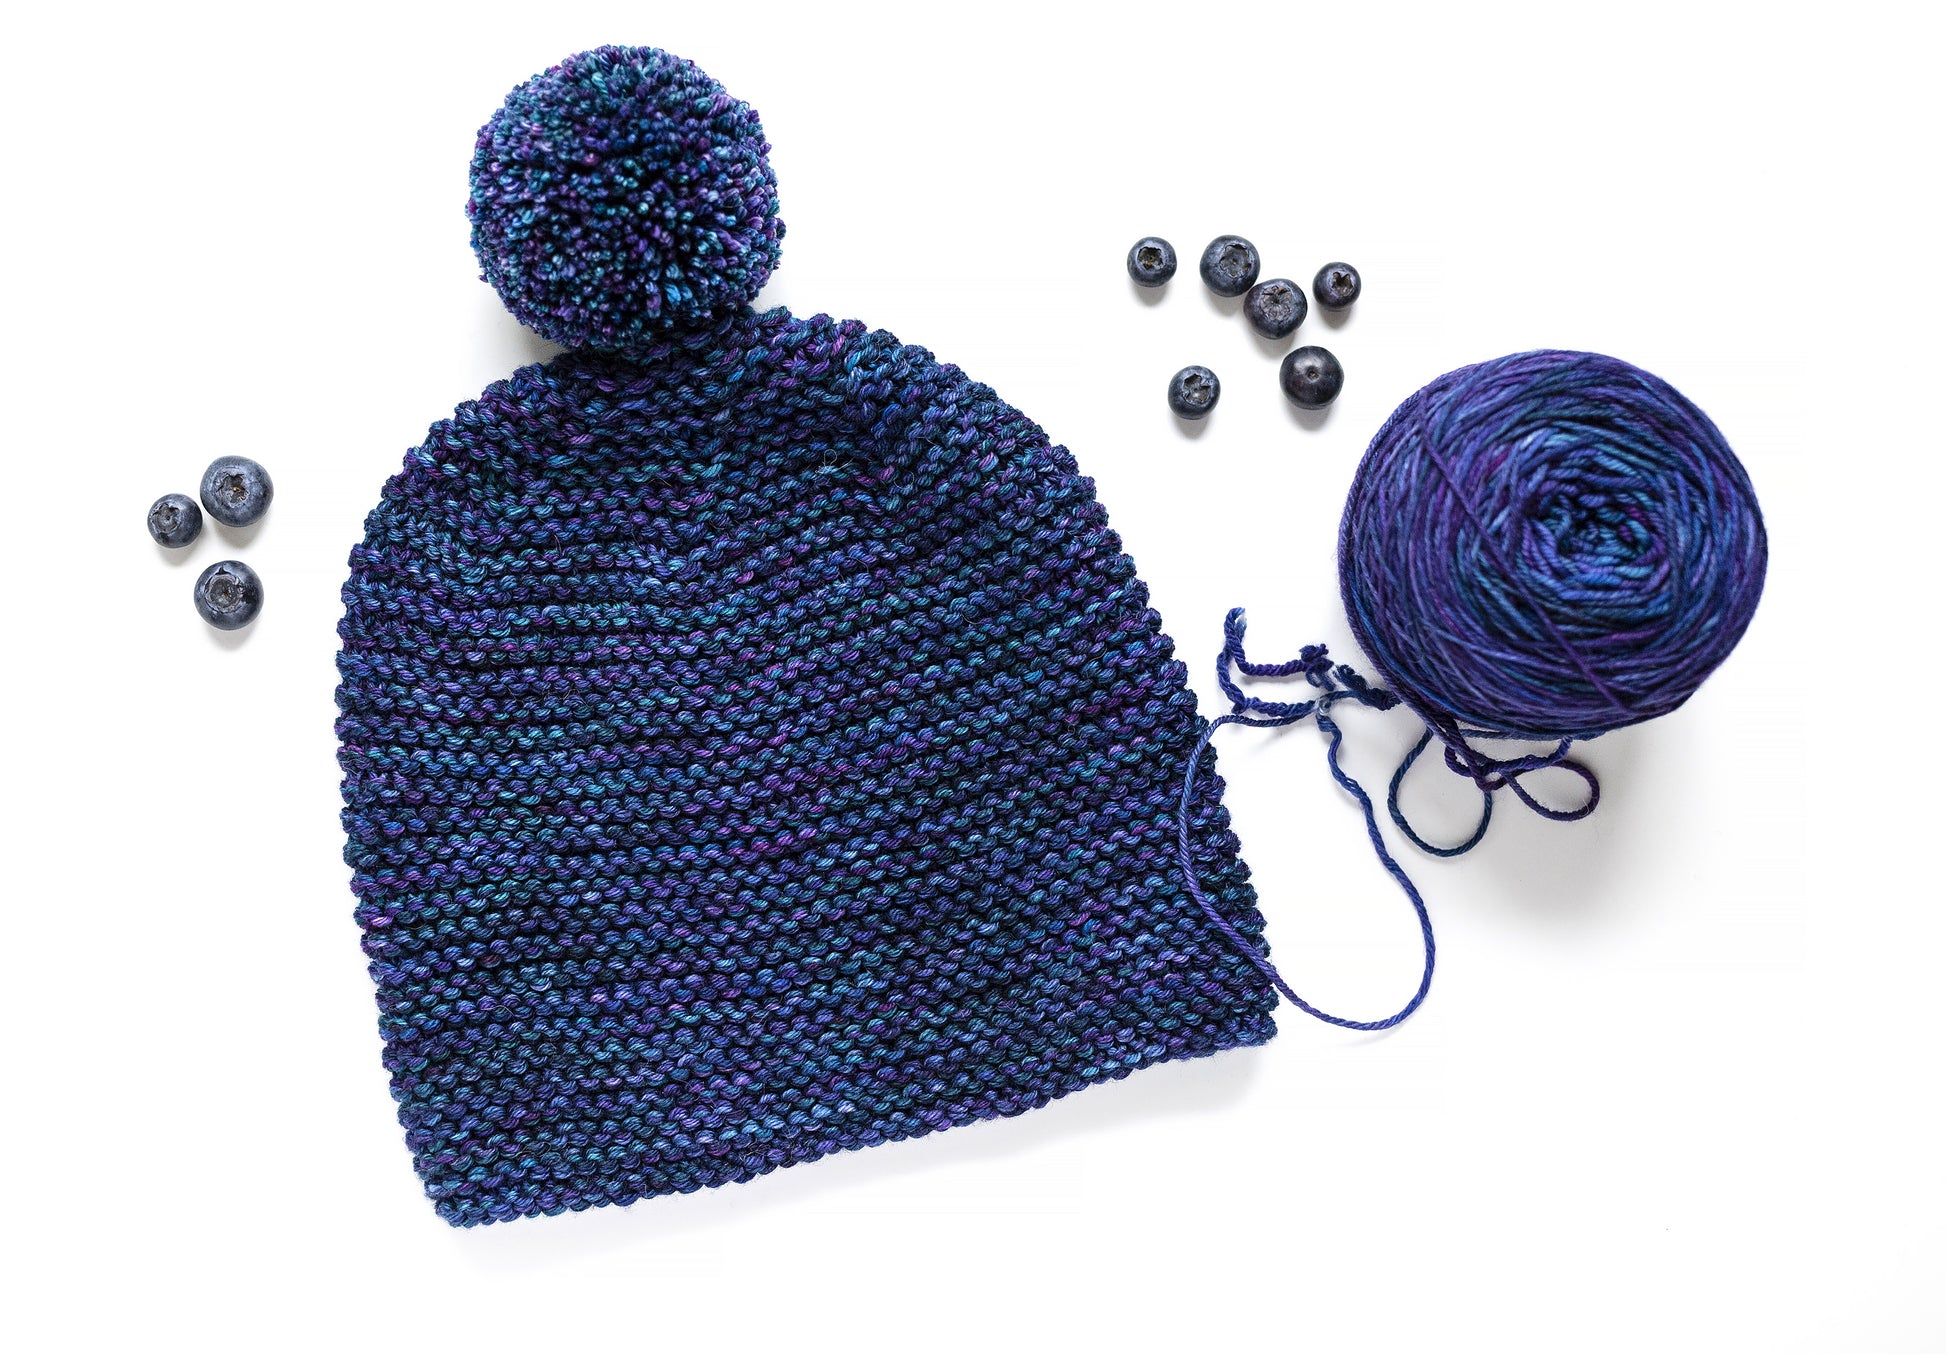 blue and purple gradient wool garter stitch hand-knitted pom pom hat with yarn ball